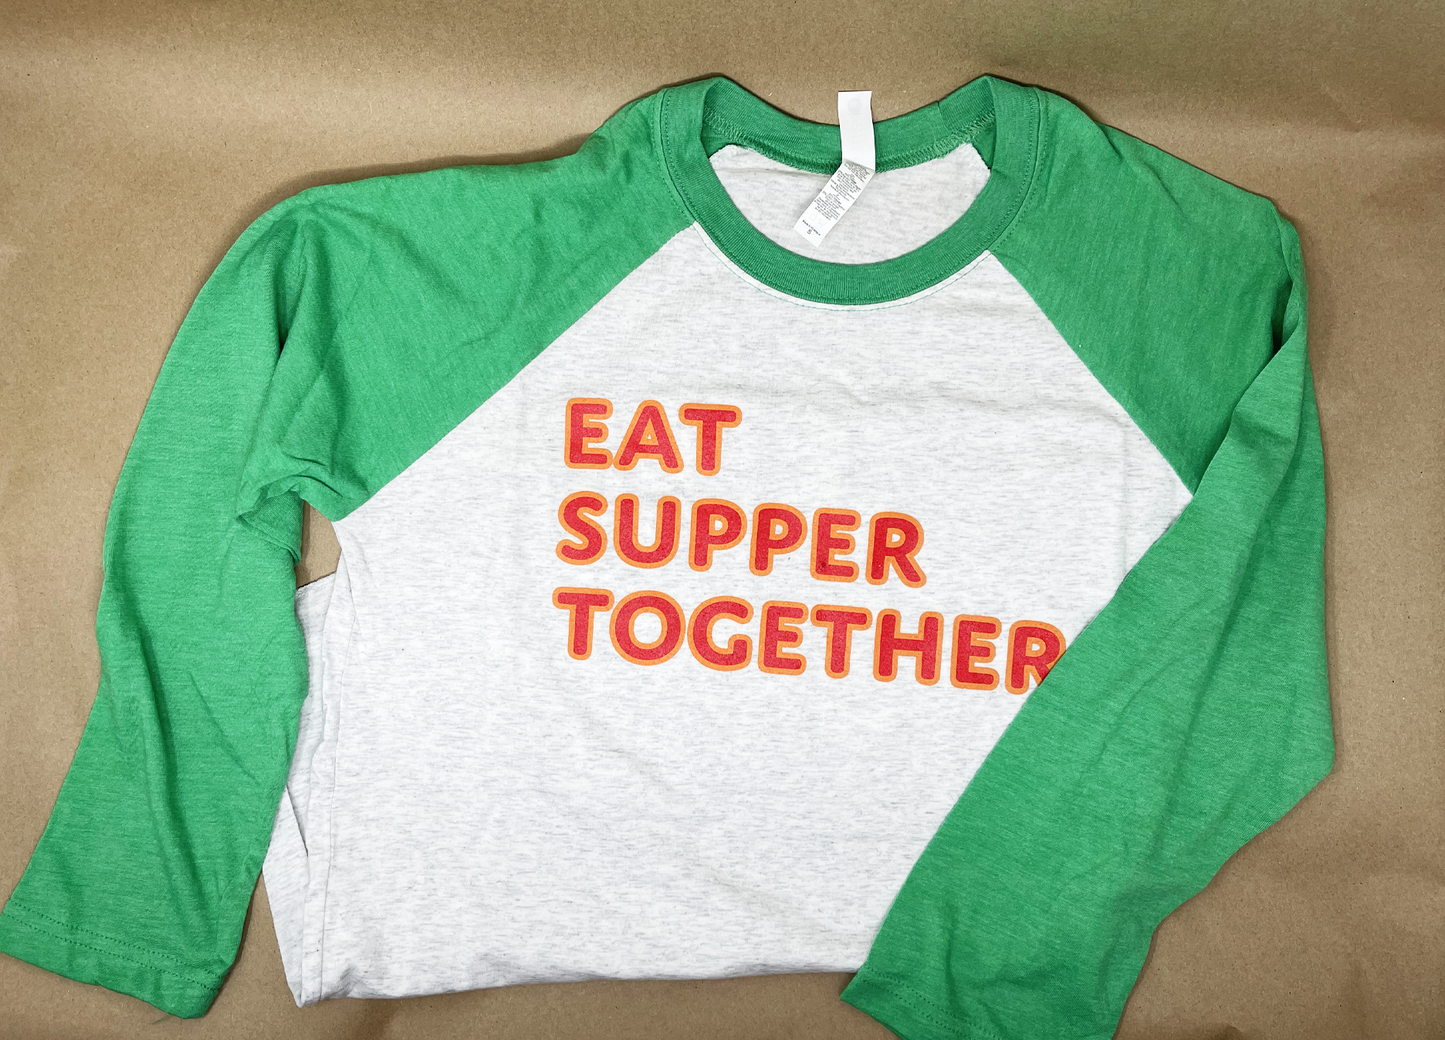 Soft, comfortable gray and green baseball jersey style T shirt with 3/4 length sleeves. Text on front reads "EAT SUPPER TOGETHER"